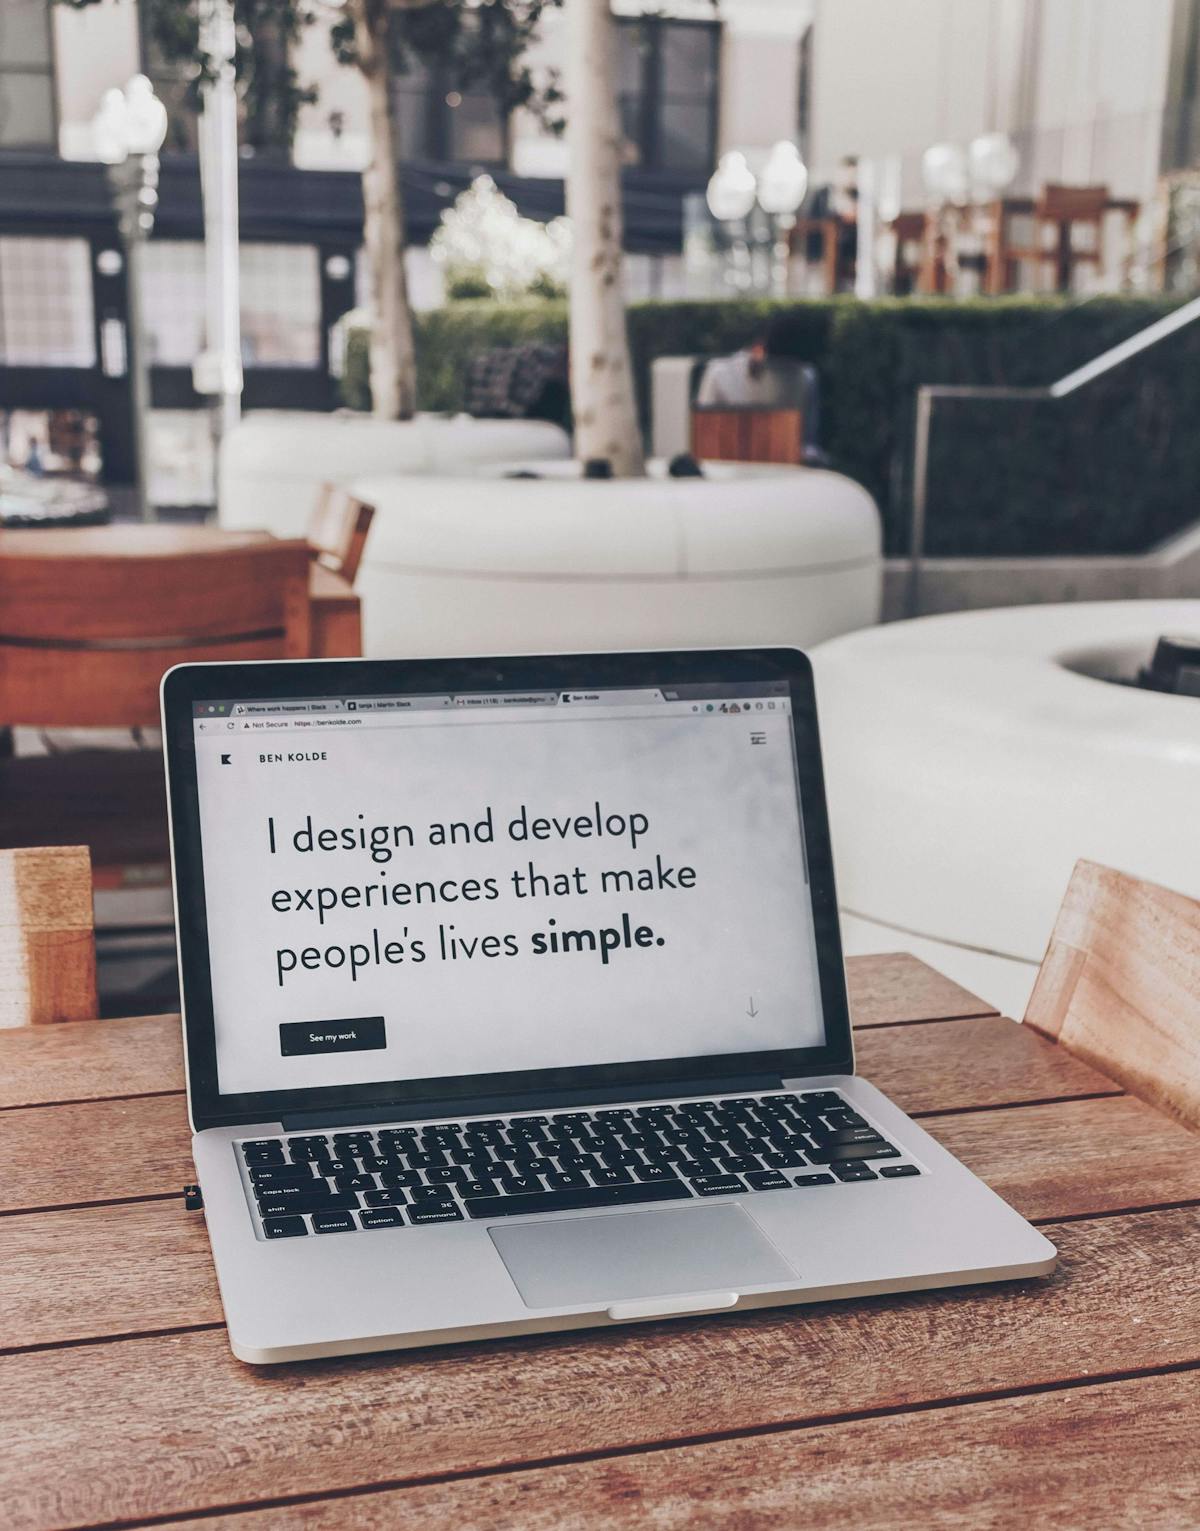 I design and develop experiences that make people's lives simple